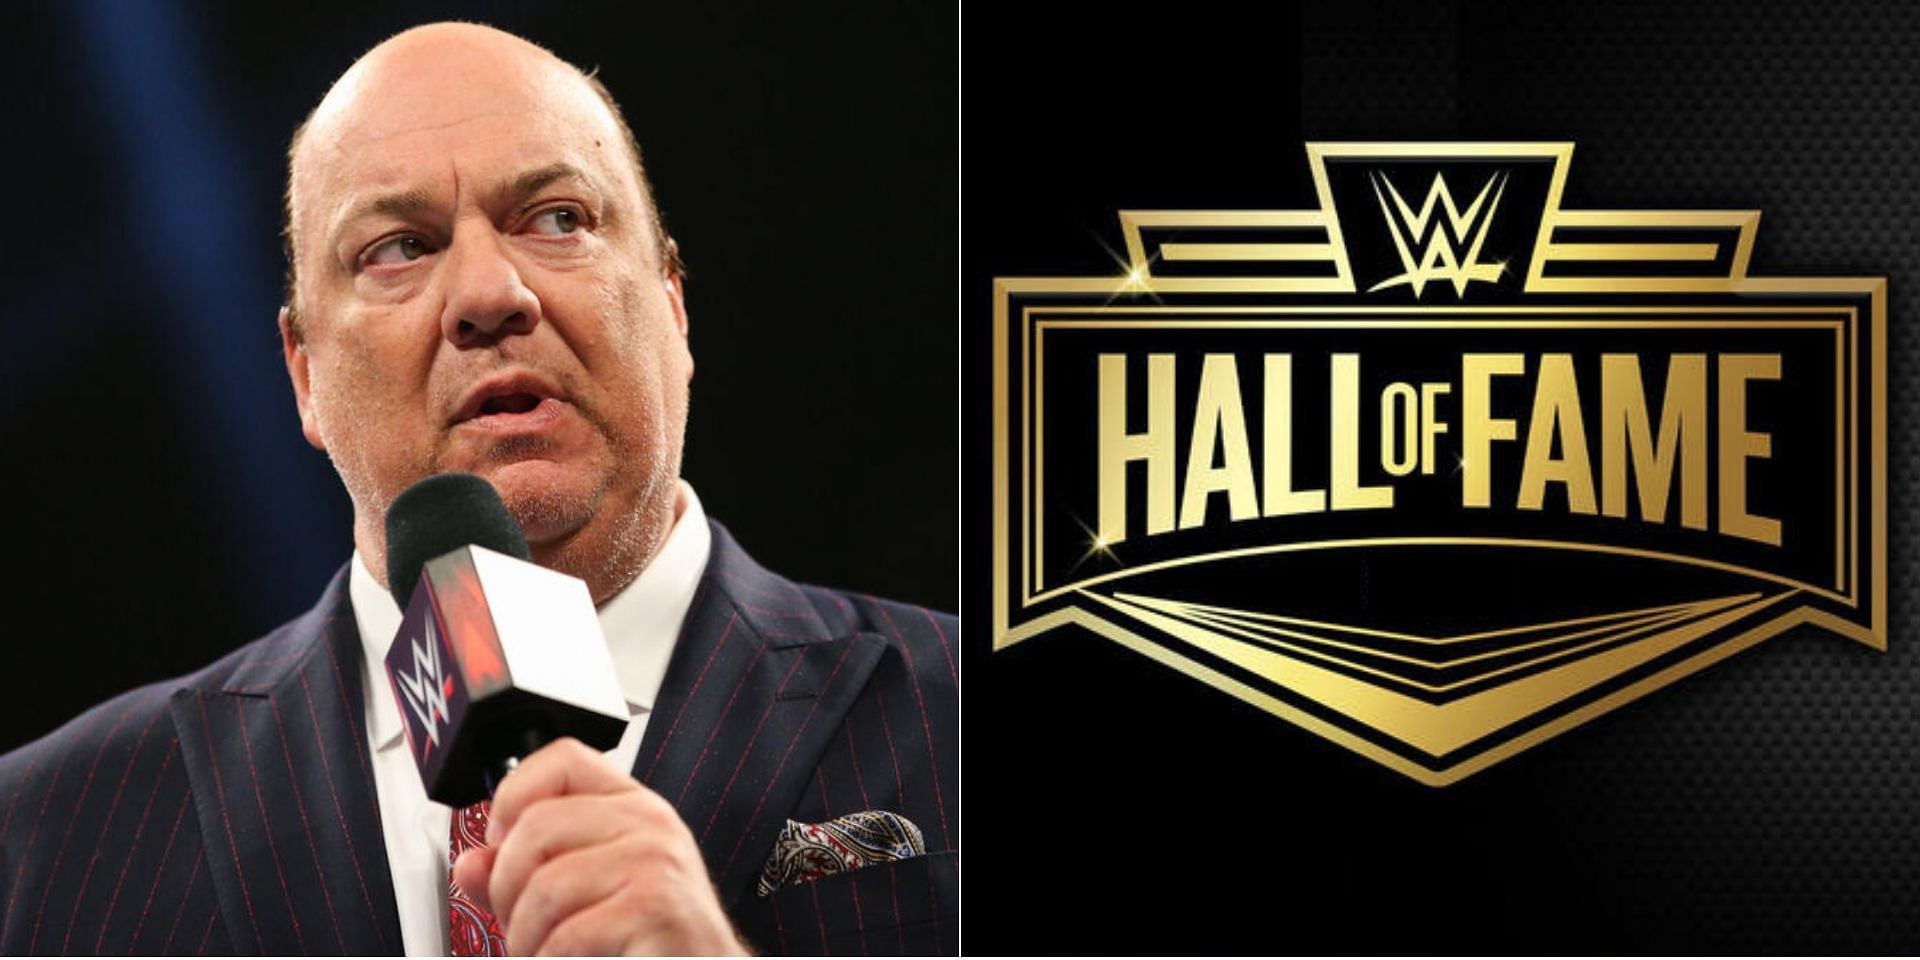 Paul Heyman will be inducted into the WWE Hall of Fame